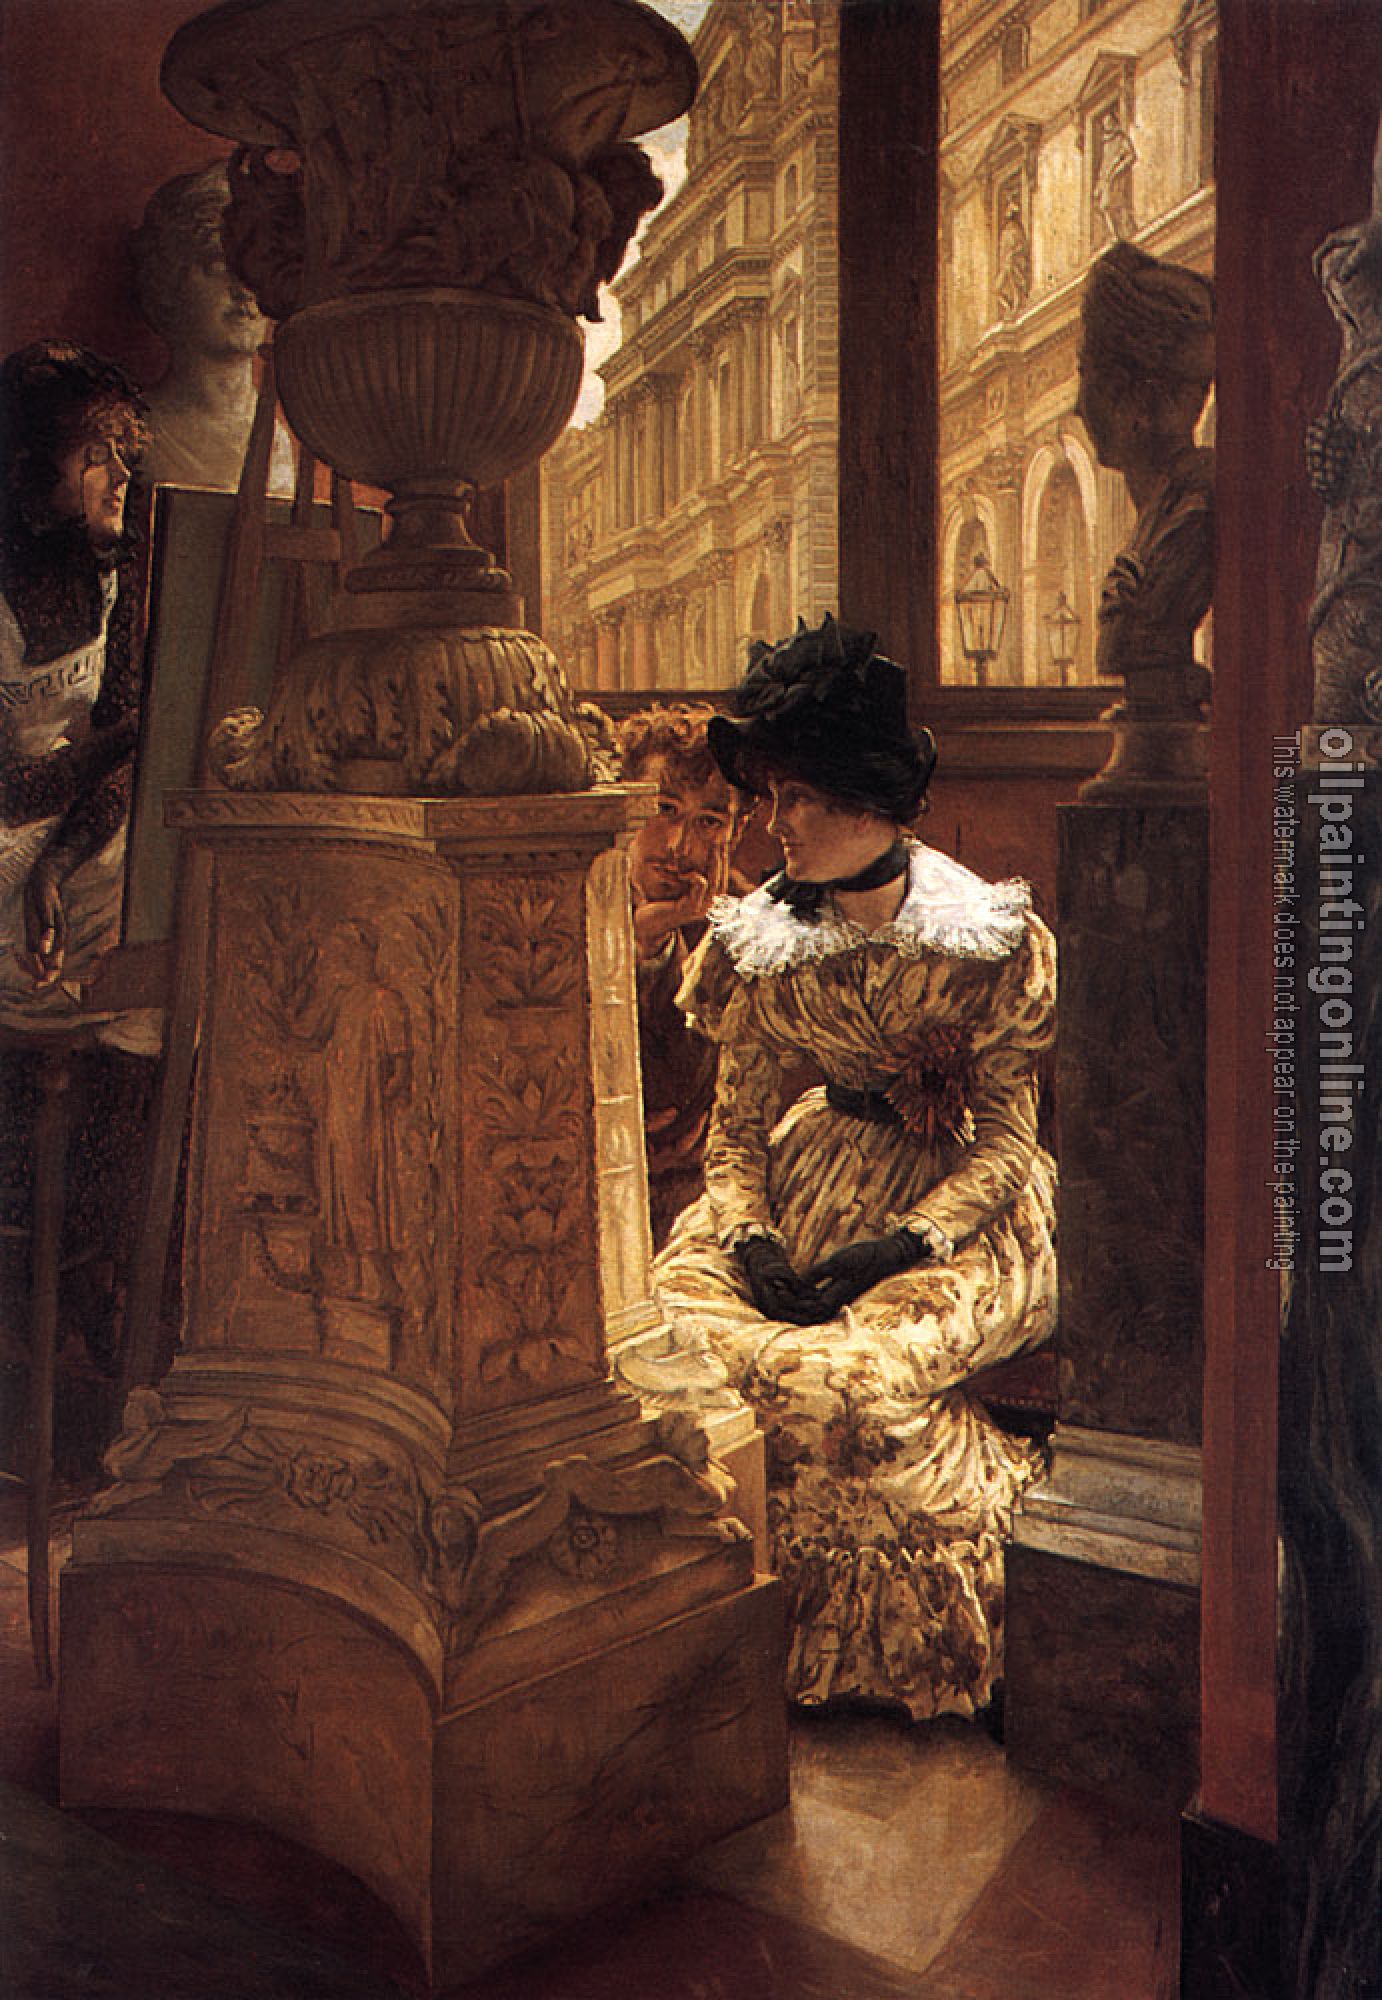 Tissot, James - In the Louvre